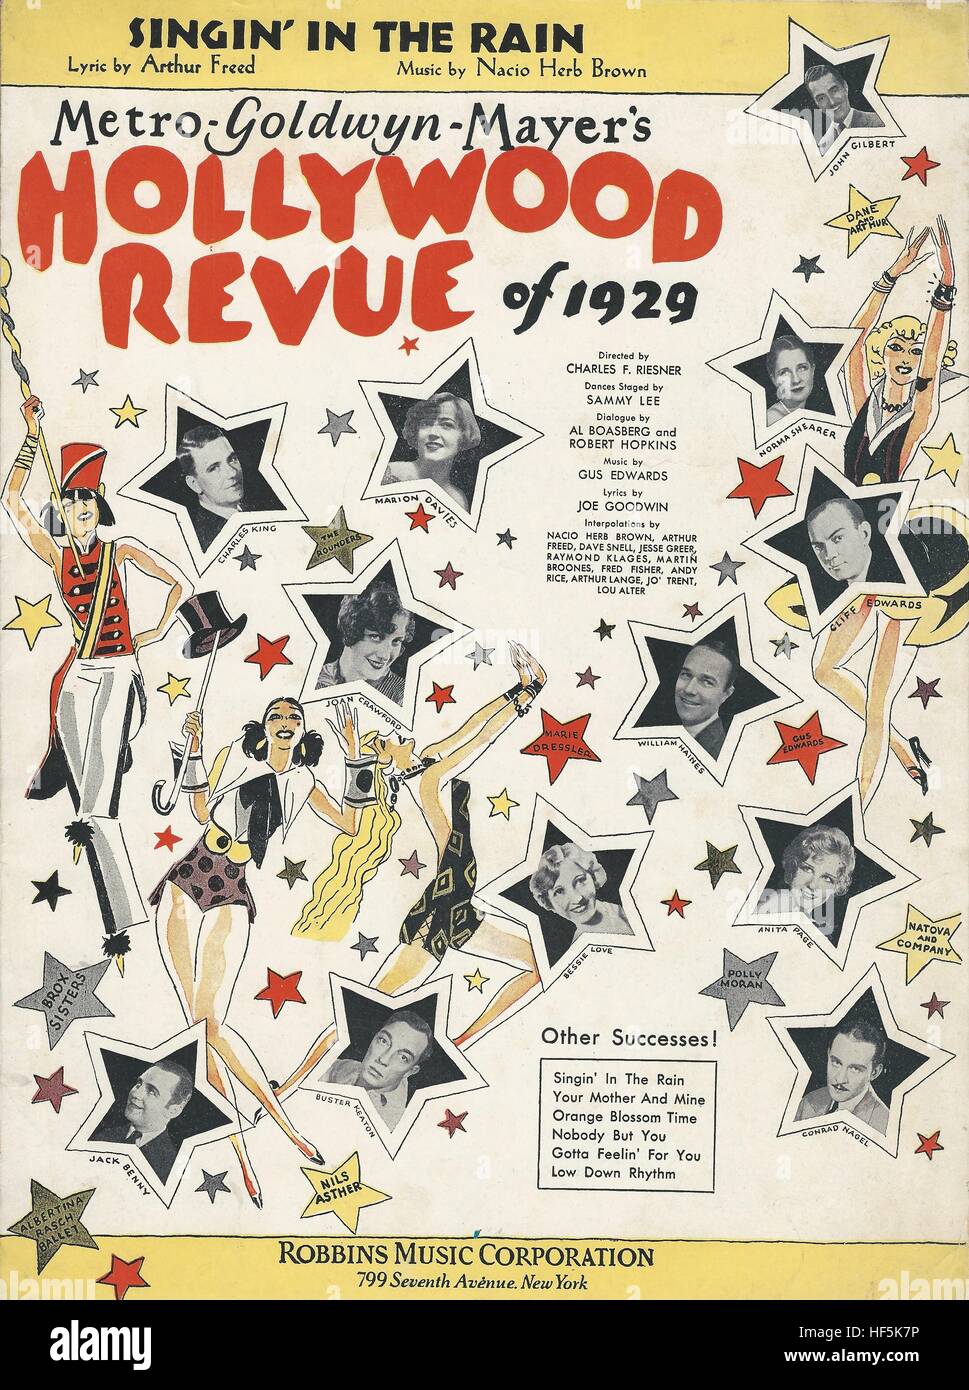 "Hollywood Revue of 1929" 1929 Film Cover Sheet Music Stockfoto